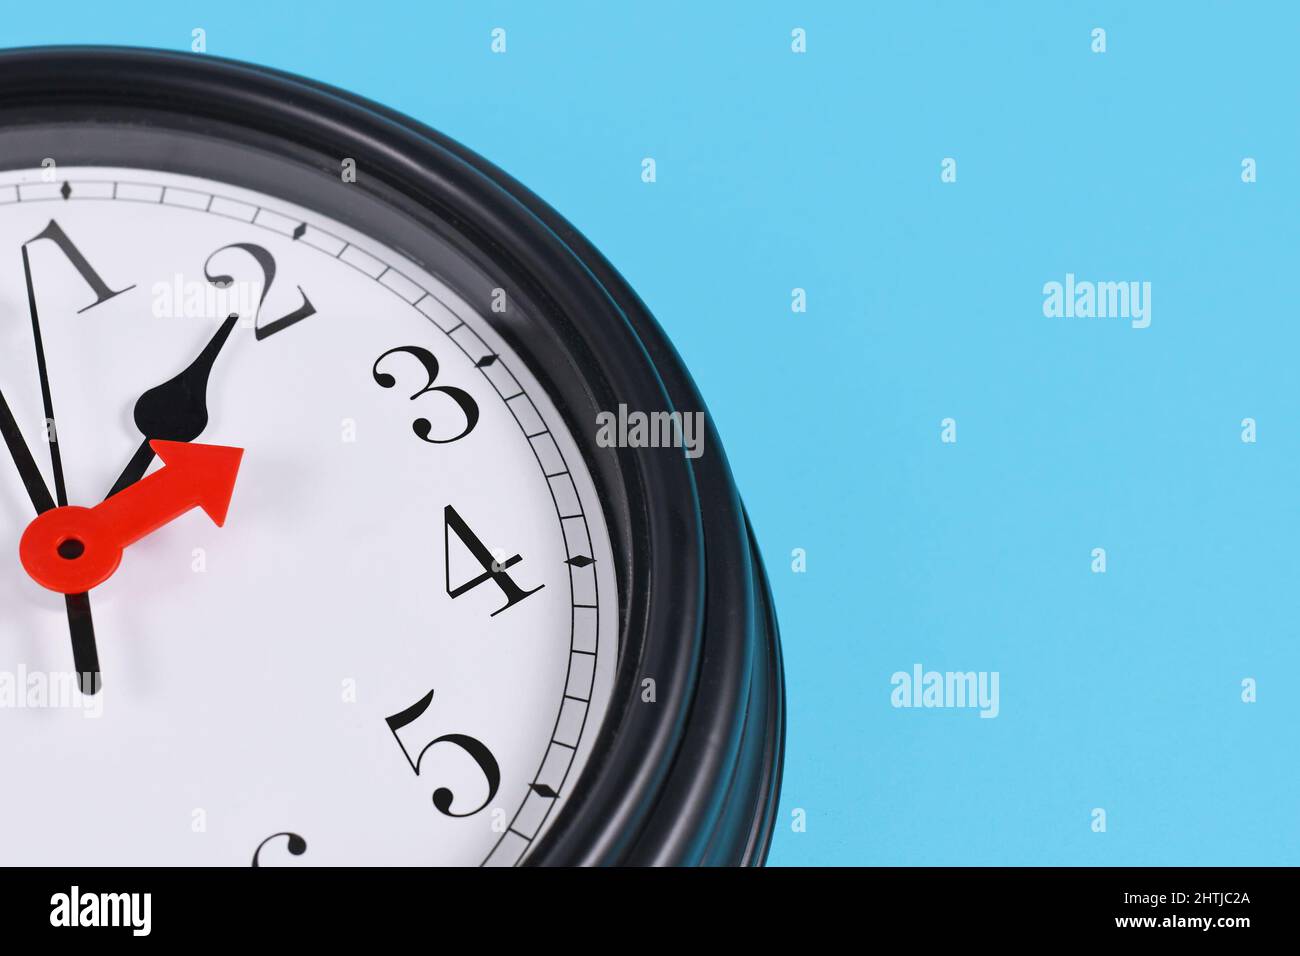 Time change for summer daylight saving in Europe concept. Red arrow symbolizing clock turned forward by one hour Stock Photo